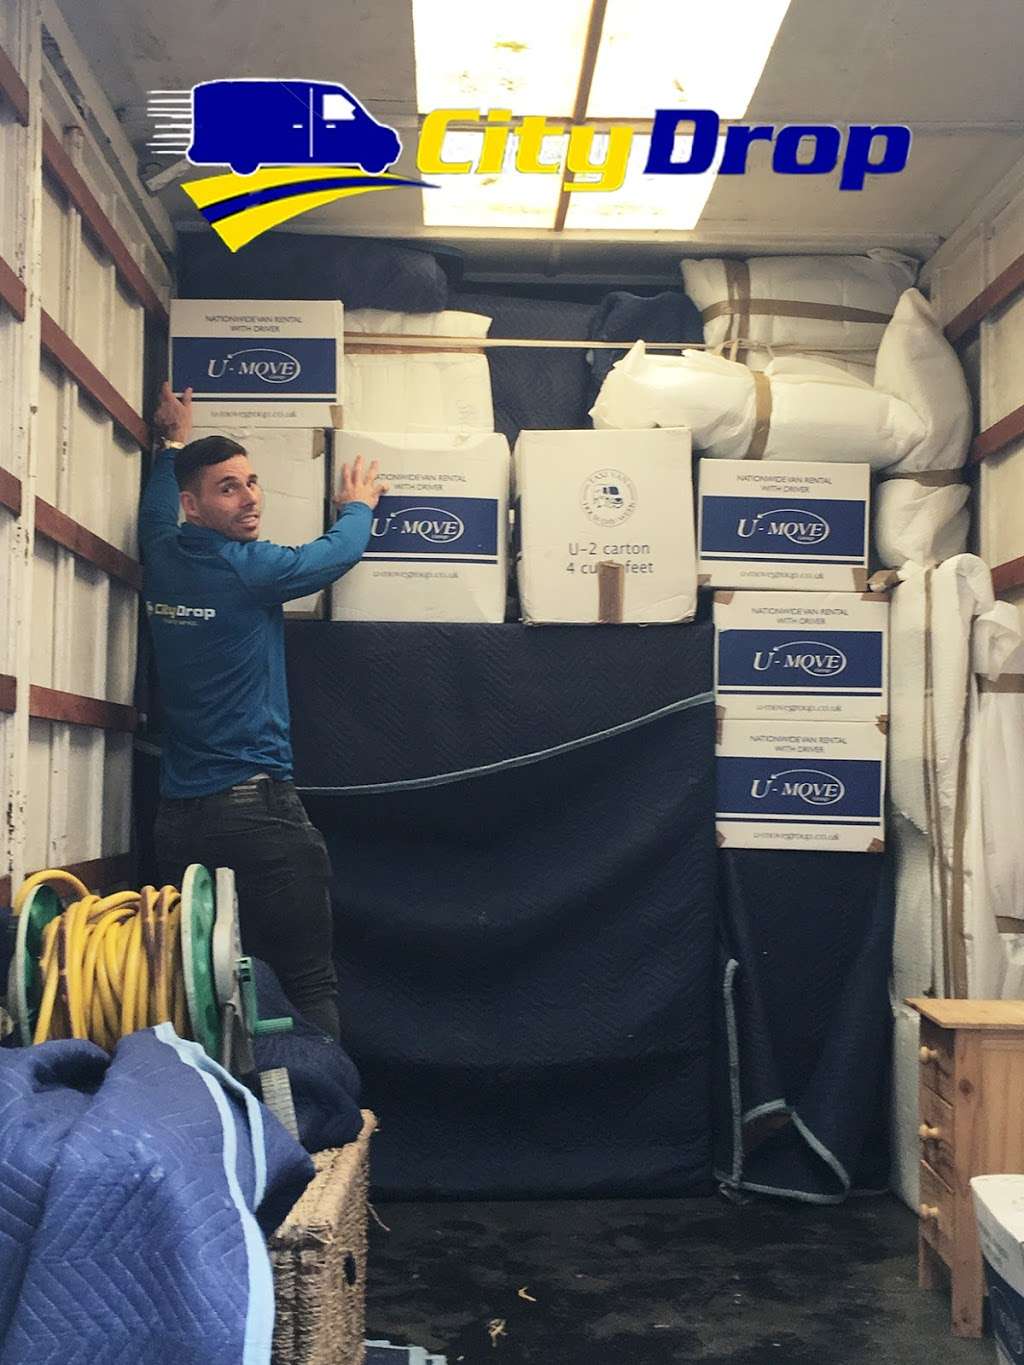 City drop movers | 19 Turners Cl, Chipping Ongar, Ongar CM5 9HH, UK | Phone: 07462 865093